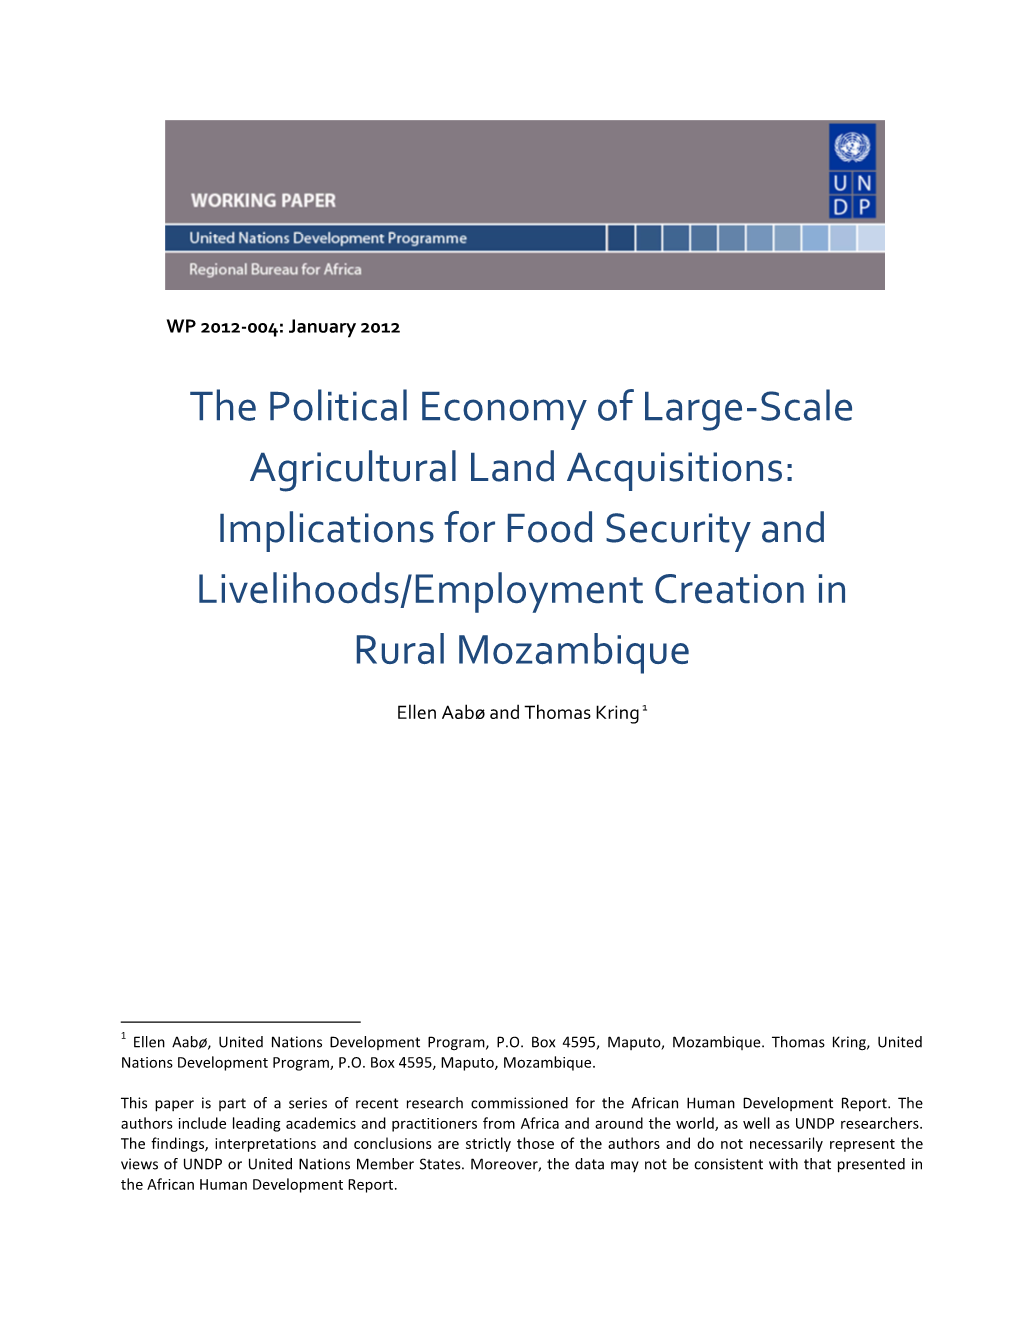 The Political Economy of Large-Scale Agricultural Land Acquisitions: Implications for Food Security and Livelihoods/Employment Creation in Rural Mozambique